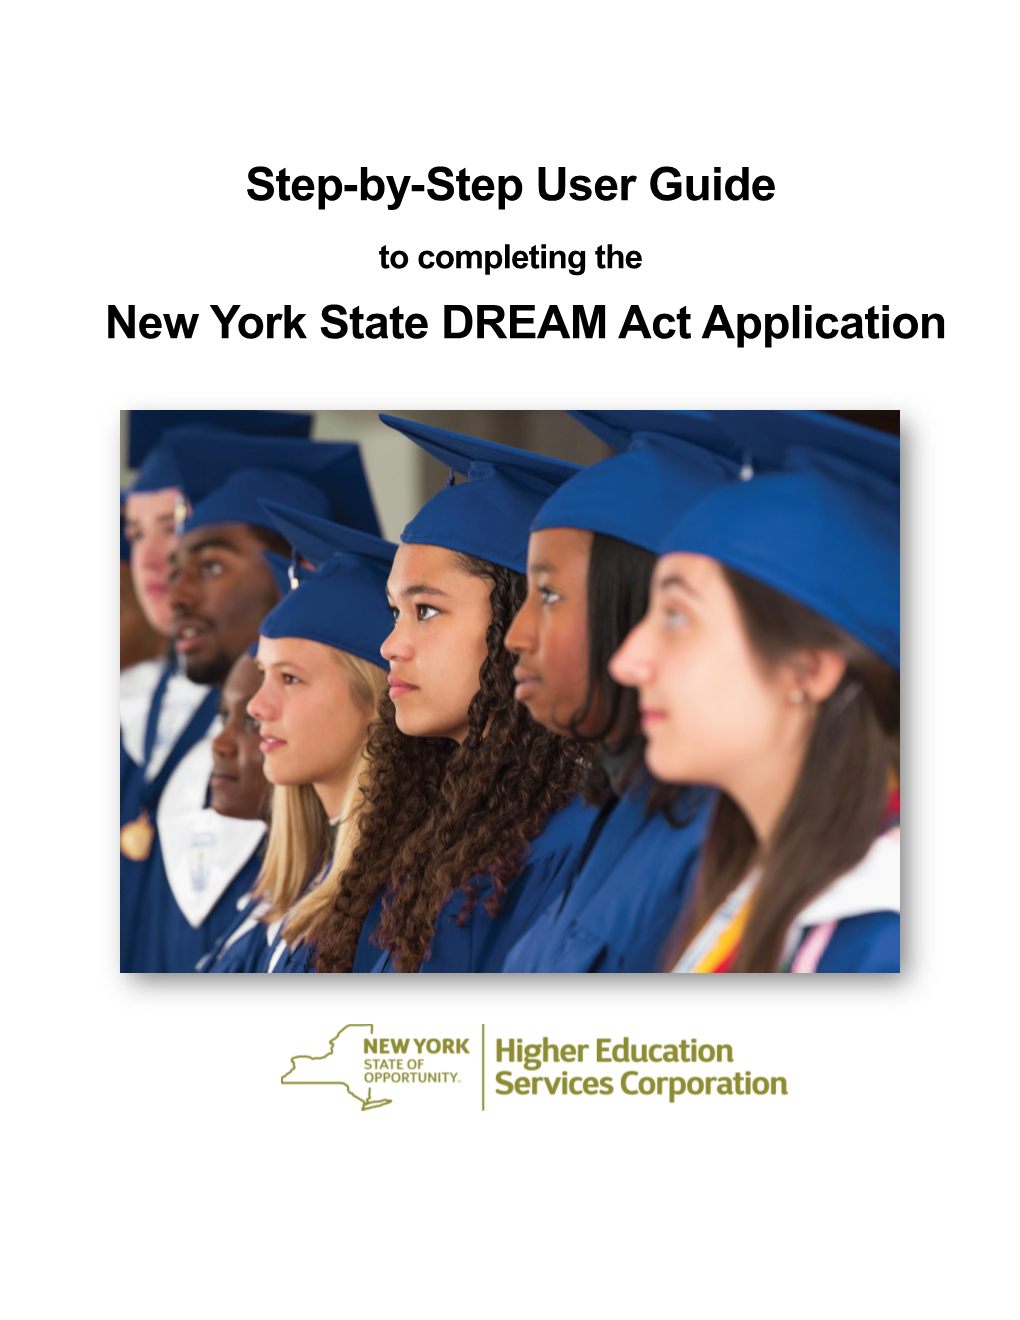 New York State DREAM Act Application